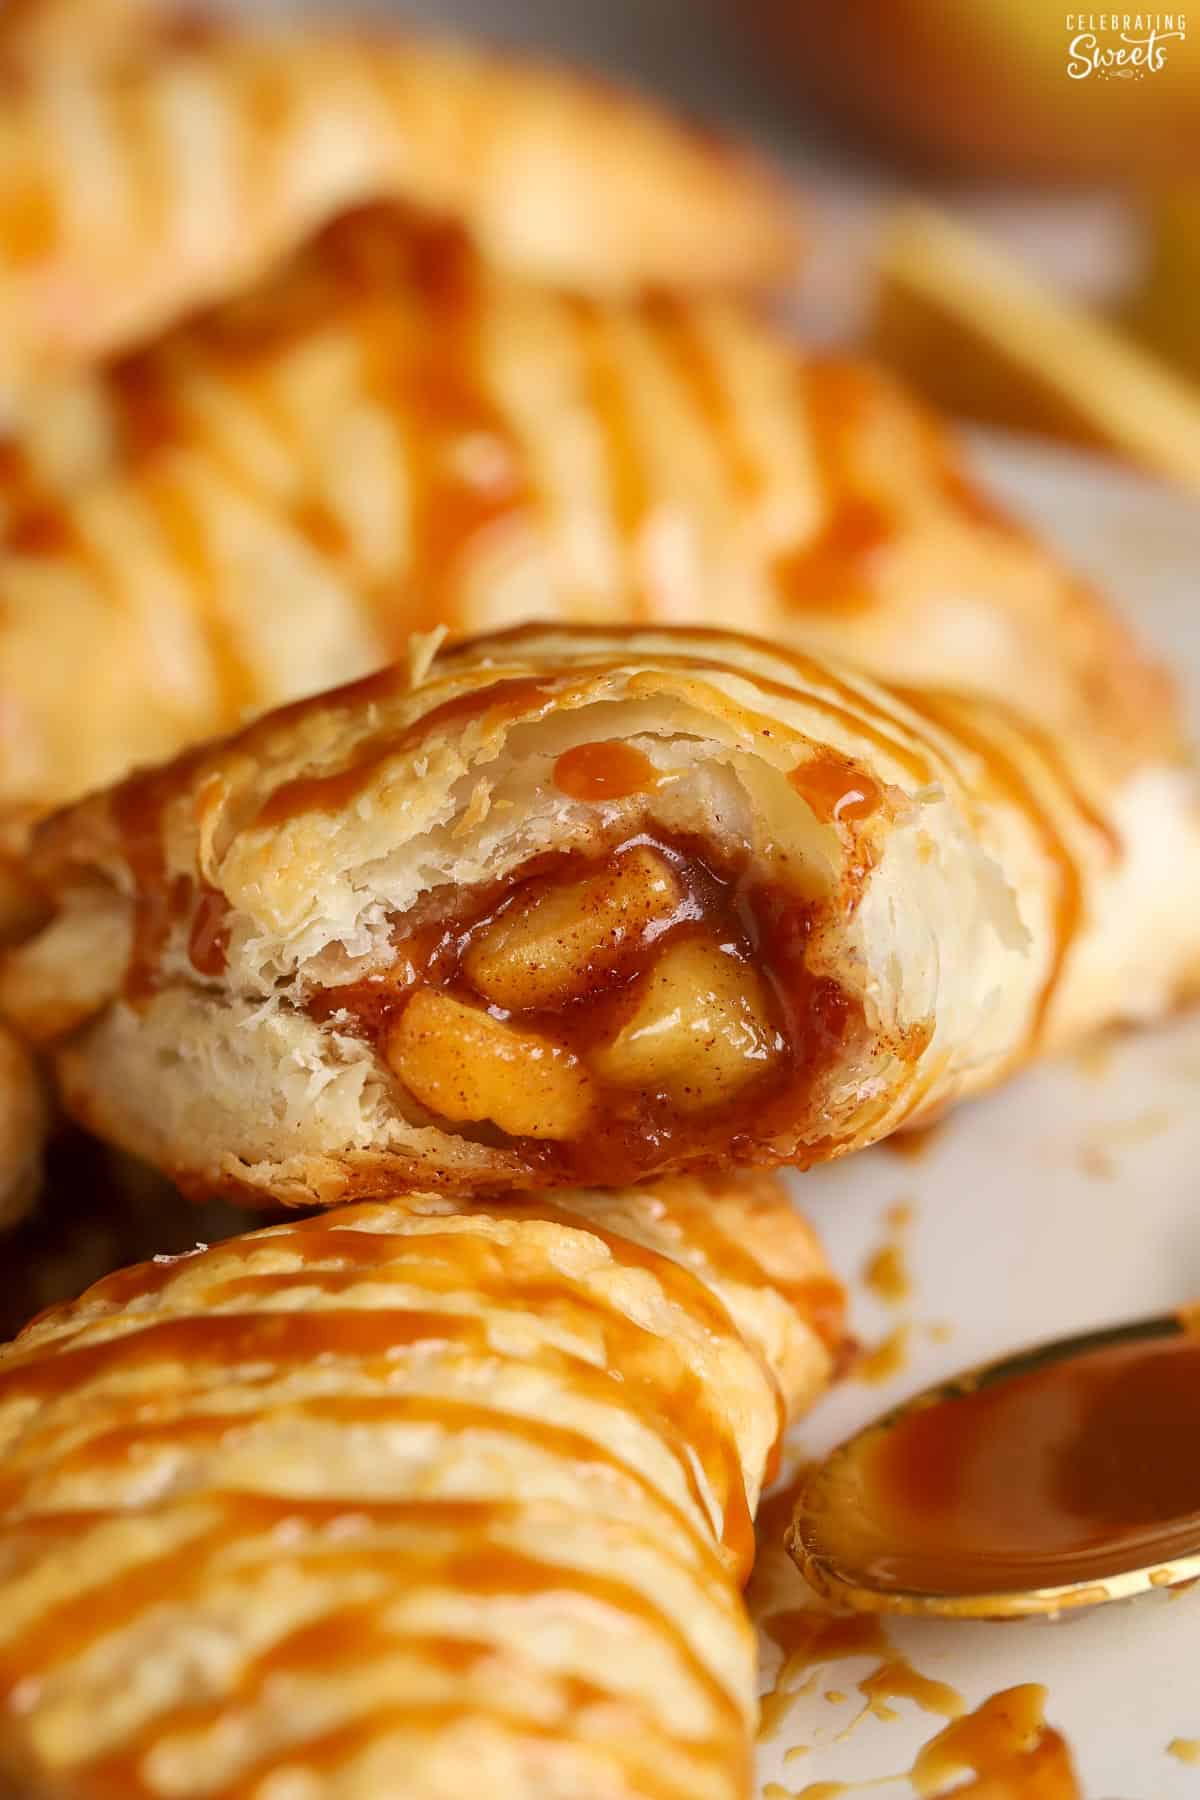 Closeup of an apple turnover with a bite taken out of it.